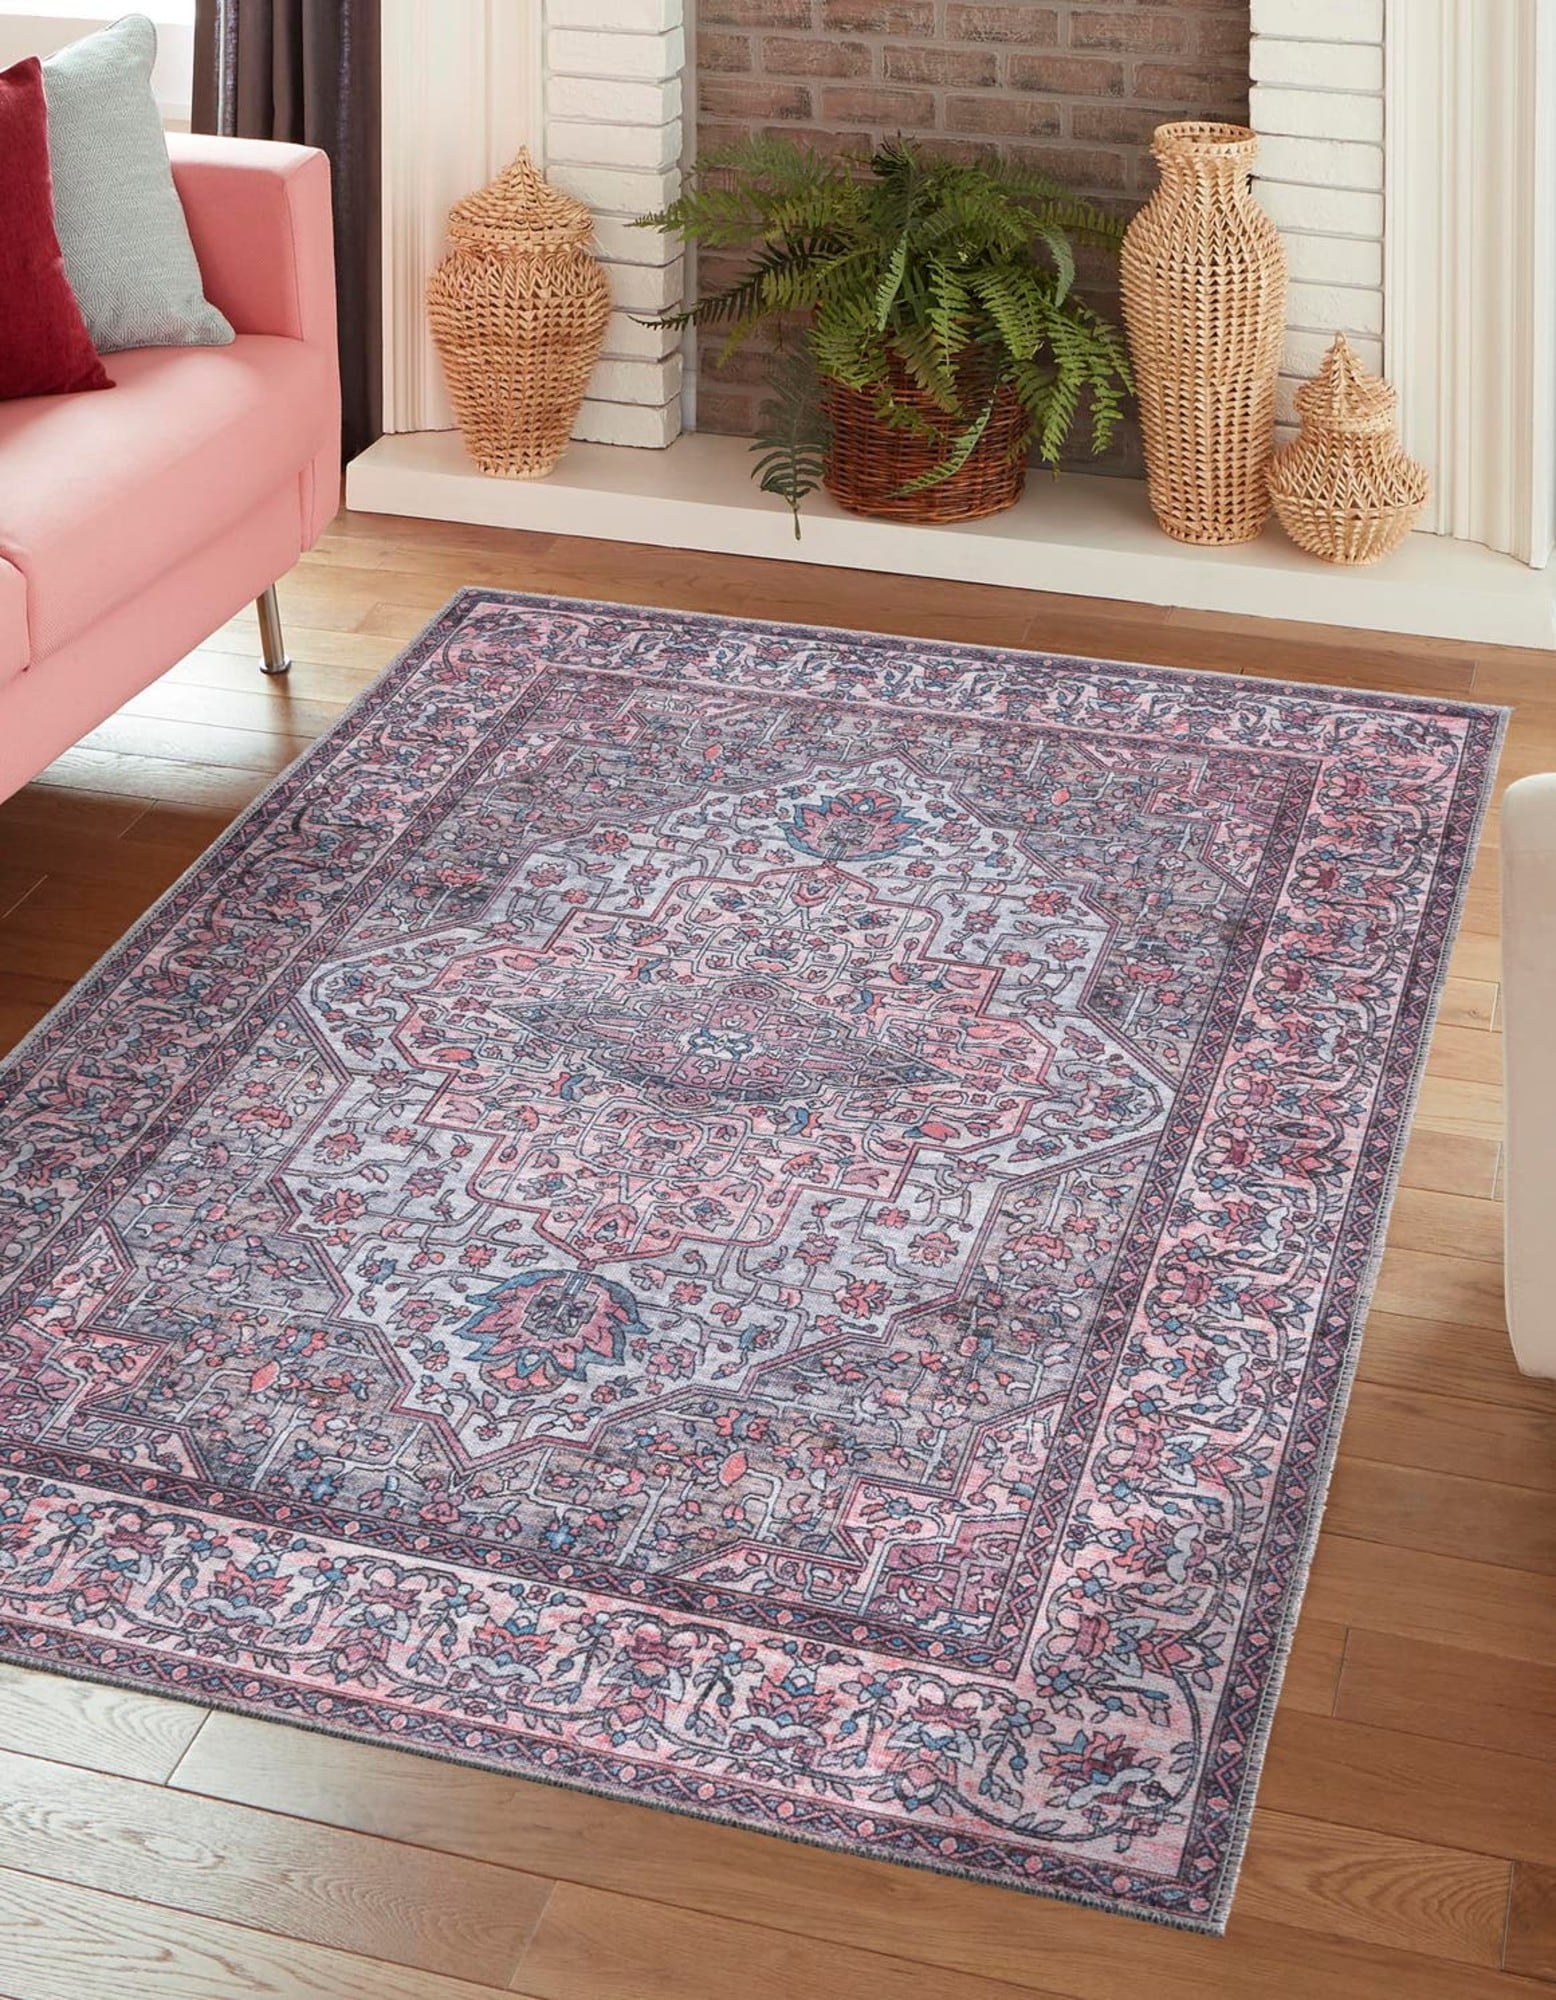 Two-Sided Rug Pad: Teebaud Non-Skid Rug Underlay - A Rug For All